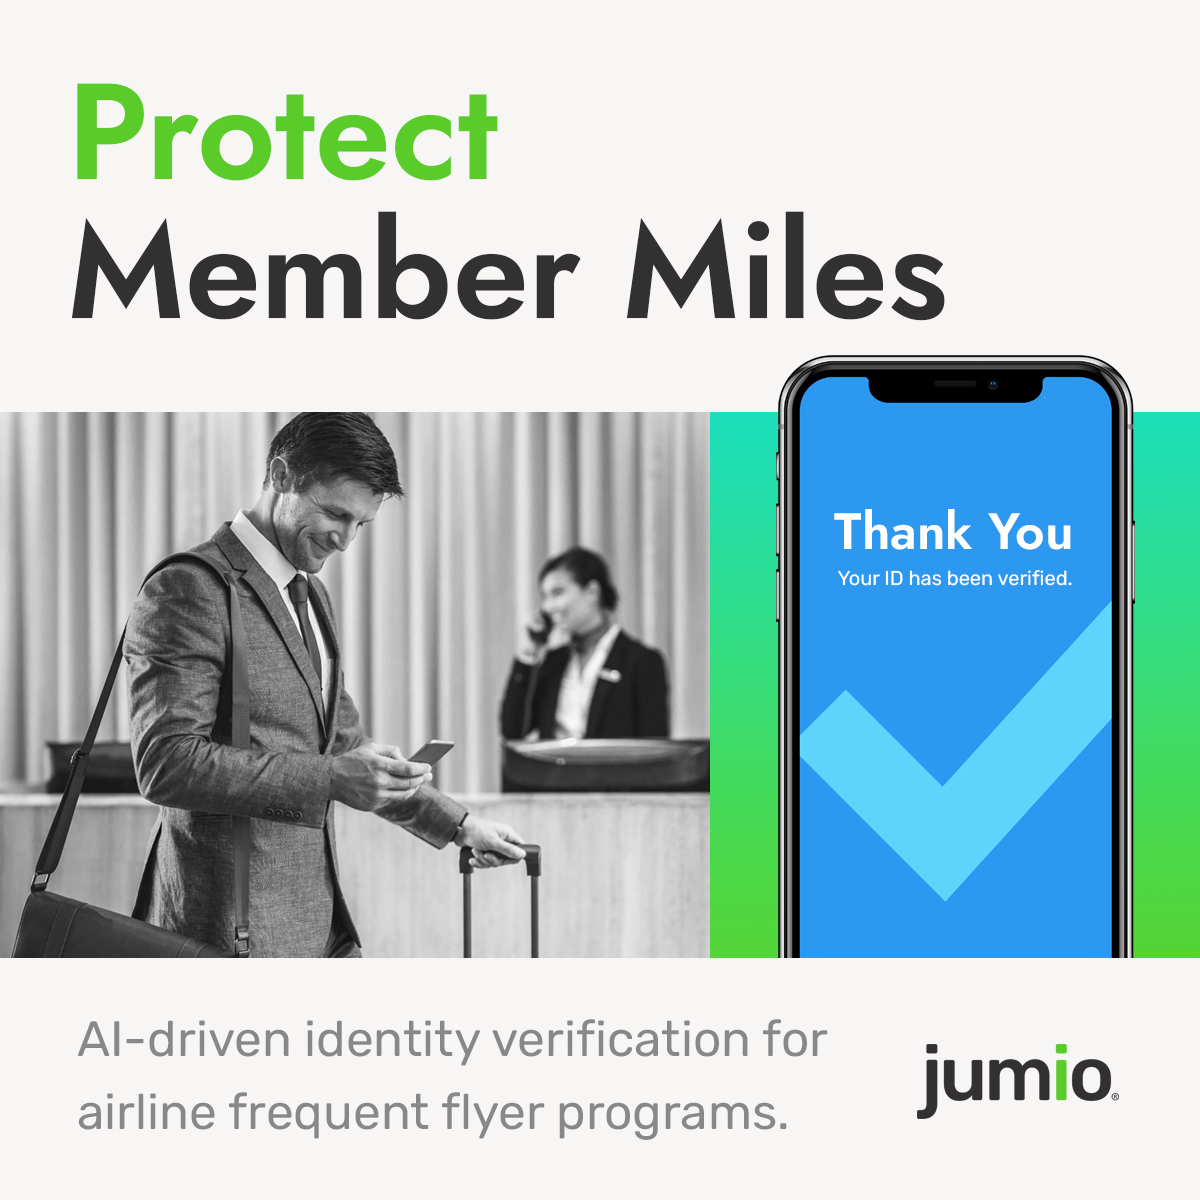 Jumio helps airlines ensure their customers are who they say they are with the ease of taking a selfie, both when they create their account and each time they use their miles. Learn more: go.jumio.com/airlines-mini